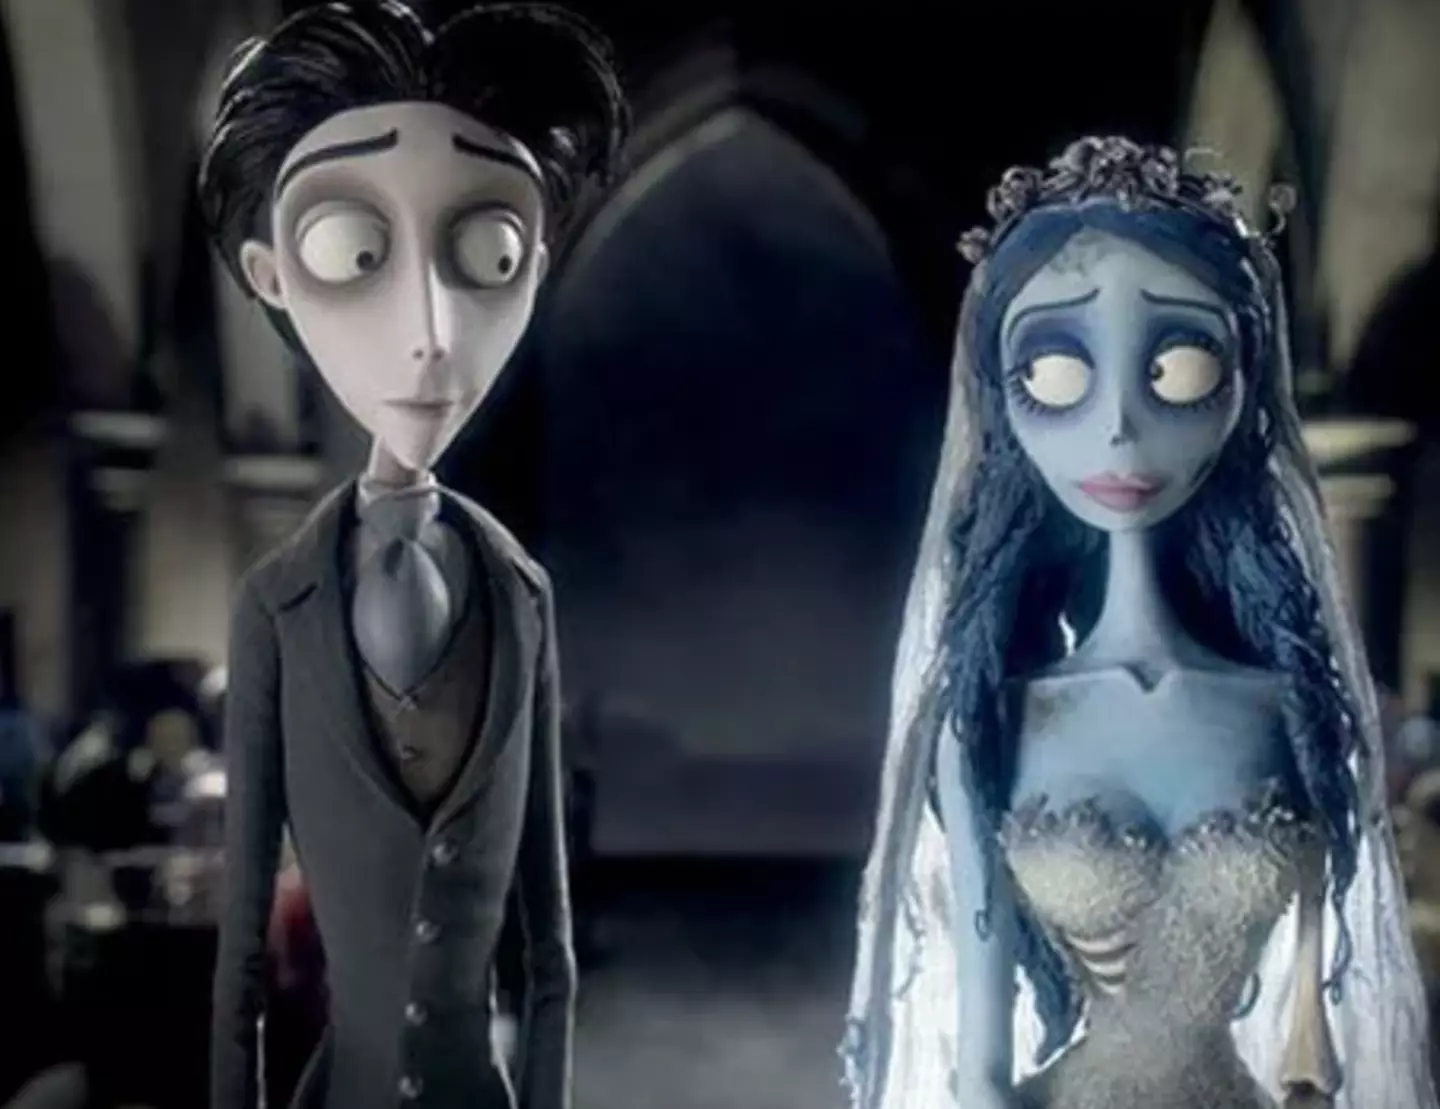 The guest dressed as the bride from Corpse Bride.